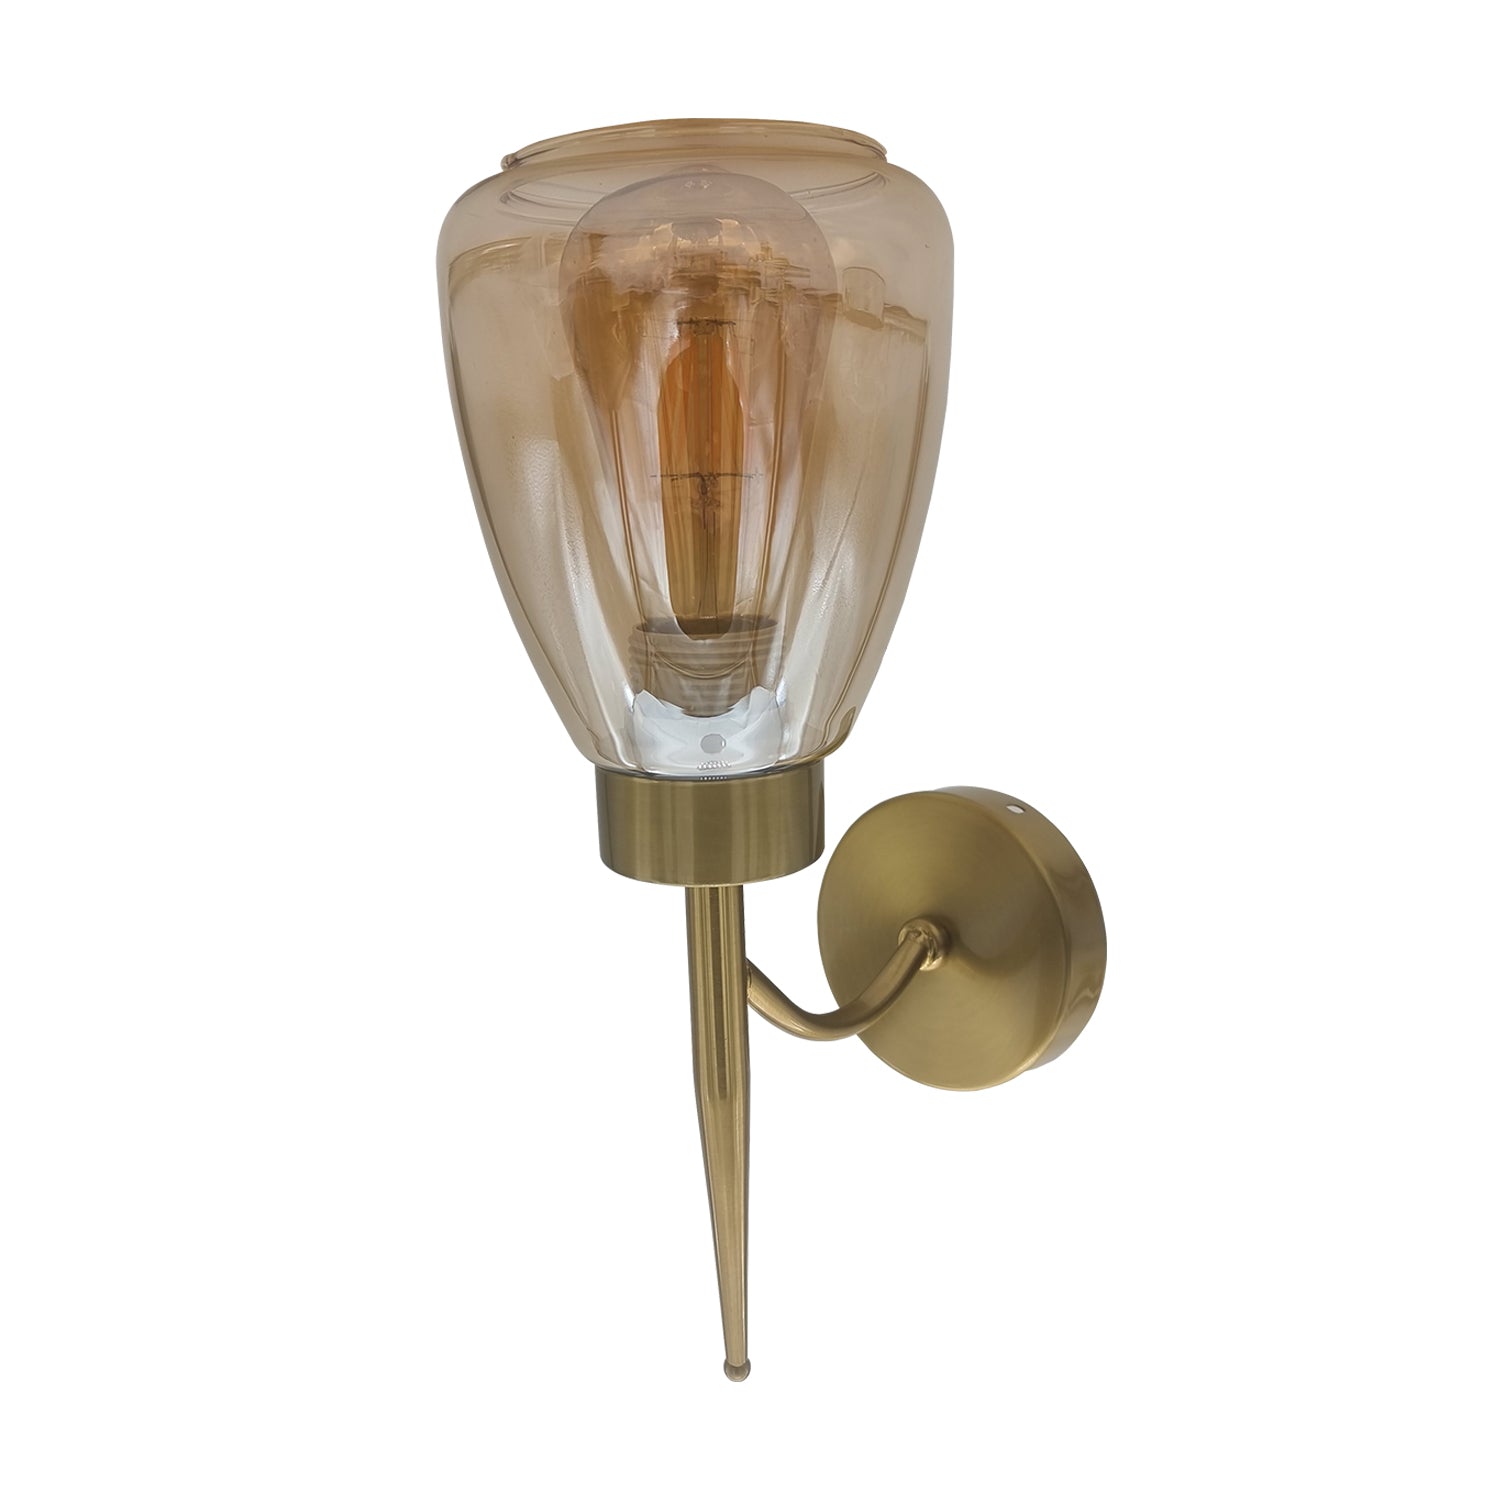 Amber Glass Wall Sconce with Copper Plated Finish – Perfect Illumination for Living Rooms, Bedside Reading, Stairs, Offices& Bars